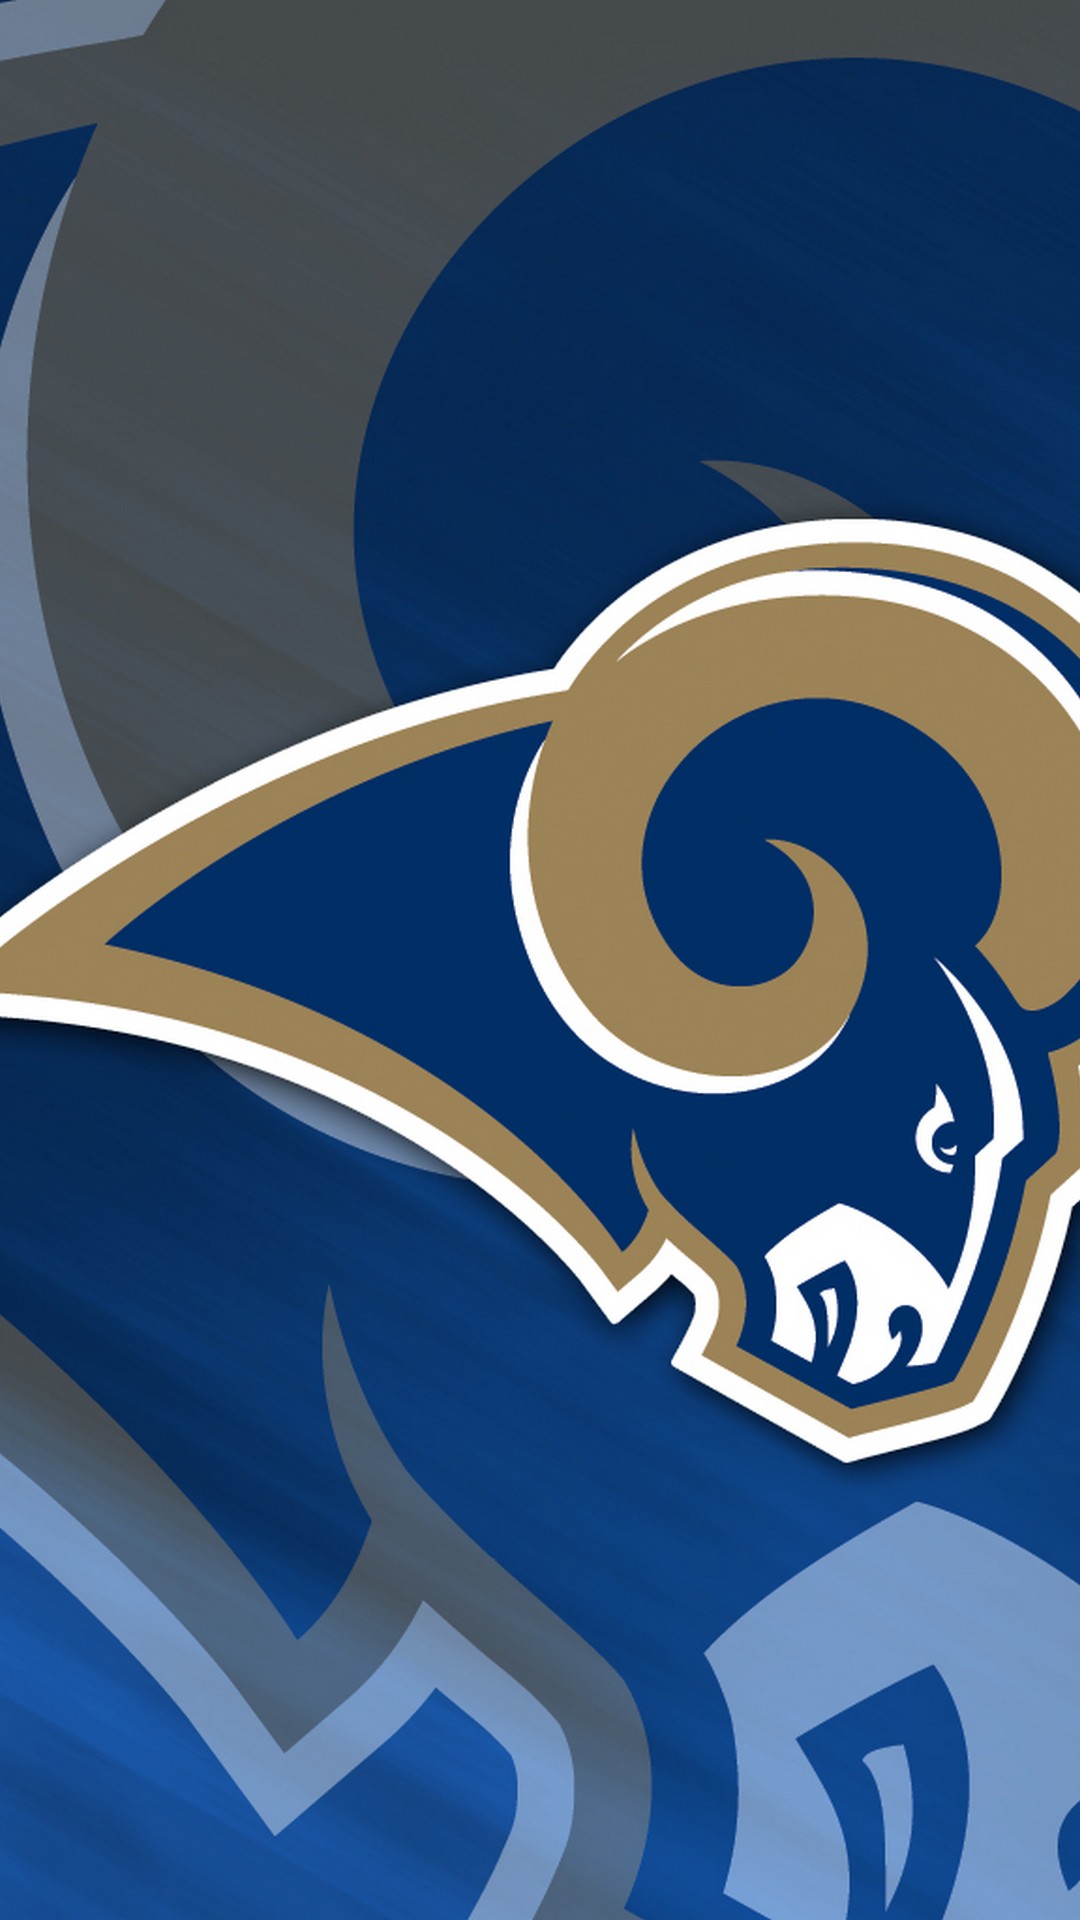 Los Angeles Rams iPhone Wallpaper with high-resolution 1080x1920 pixel. Download and set as wallpaper for Desktop Computer, Apple iPhone X, XS Max, XR, 8, 7, 6, SE, iPad, Android